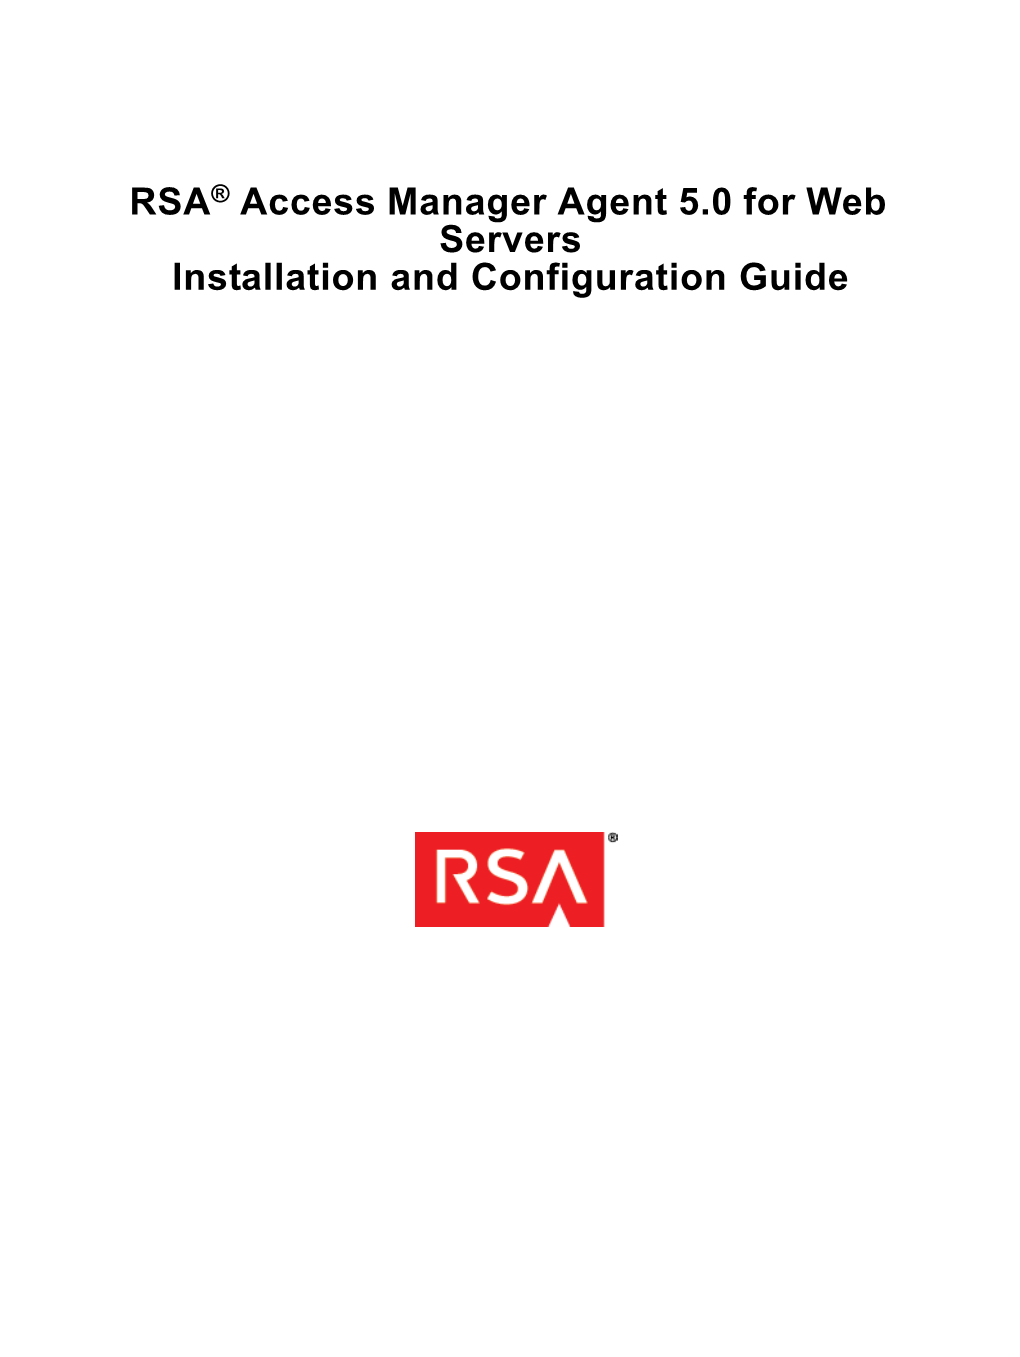 RSA® Access Manager Agent 5.0 for Web Servers Installation And